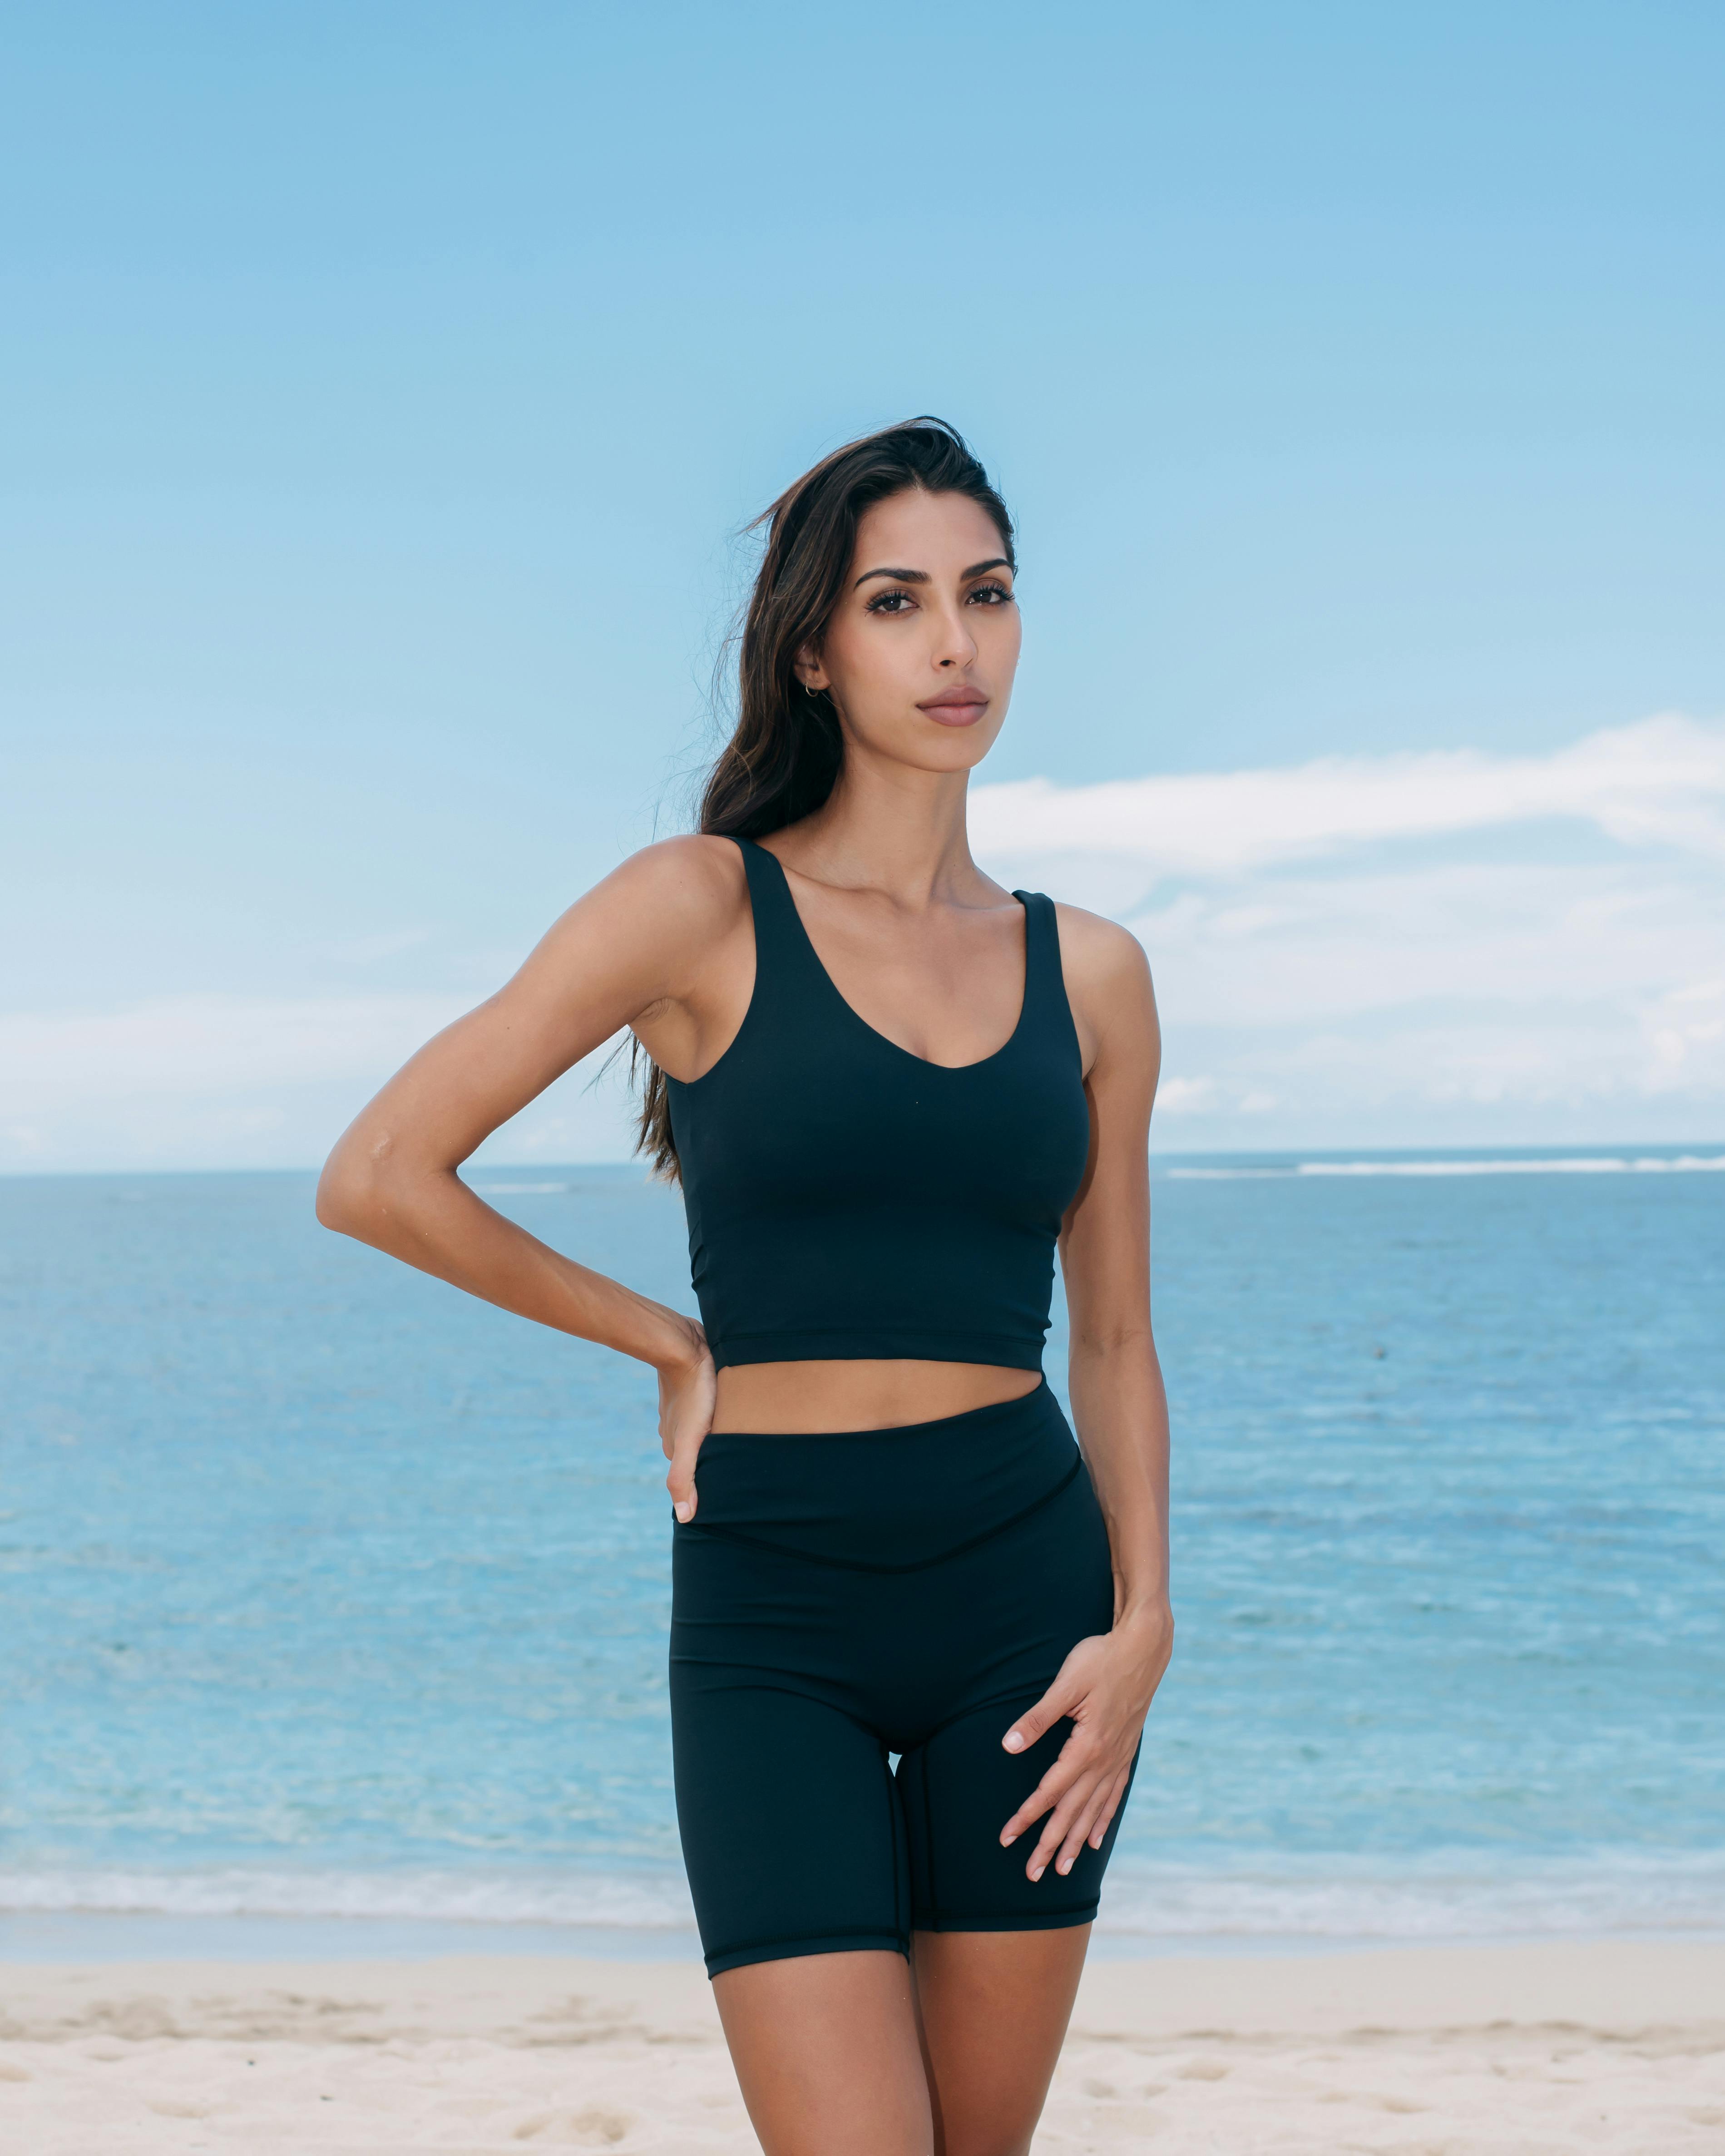 A woman in black sports bra and shorts on the beach · Free Stock Photo